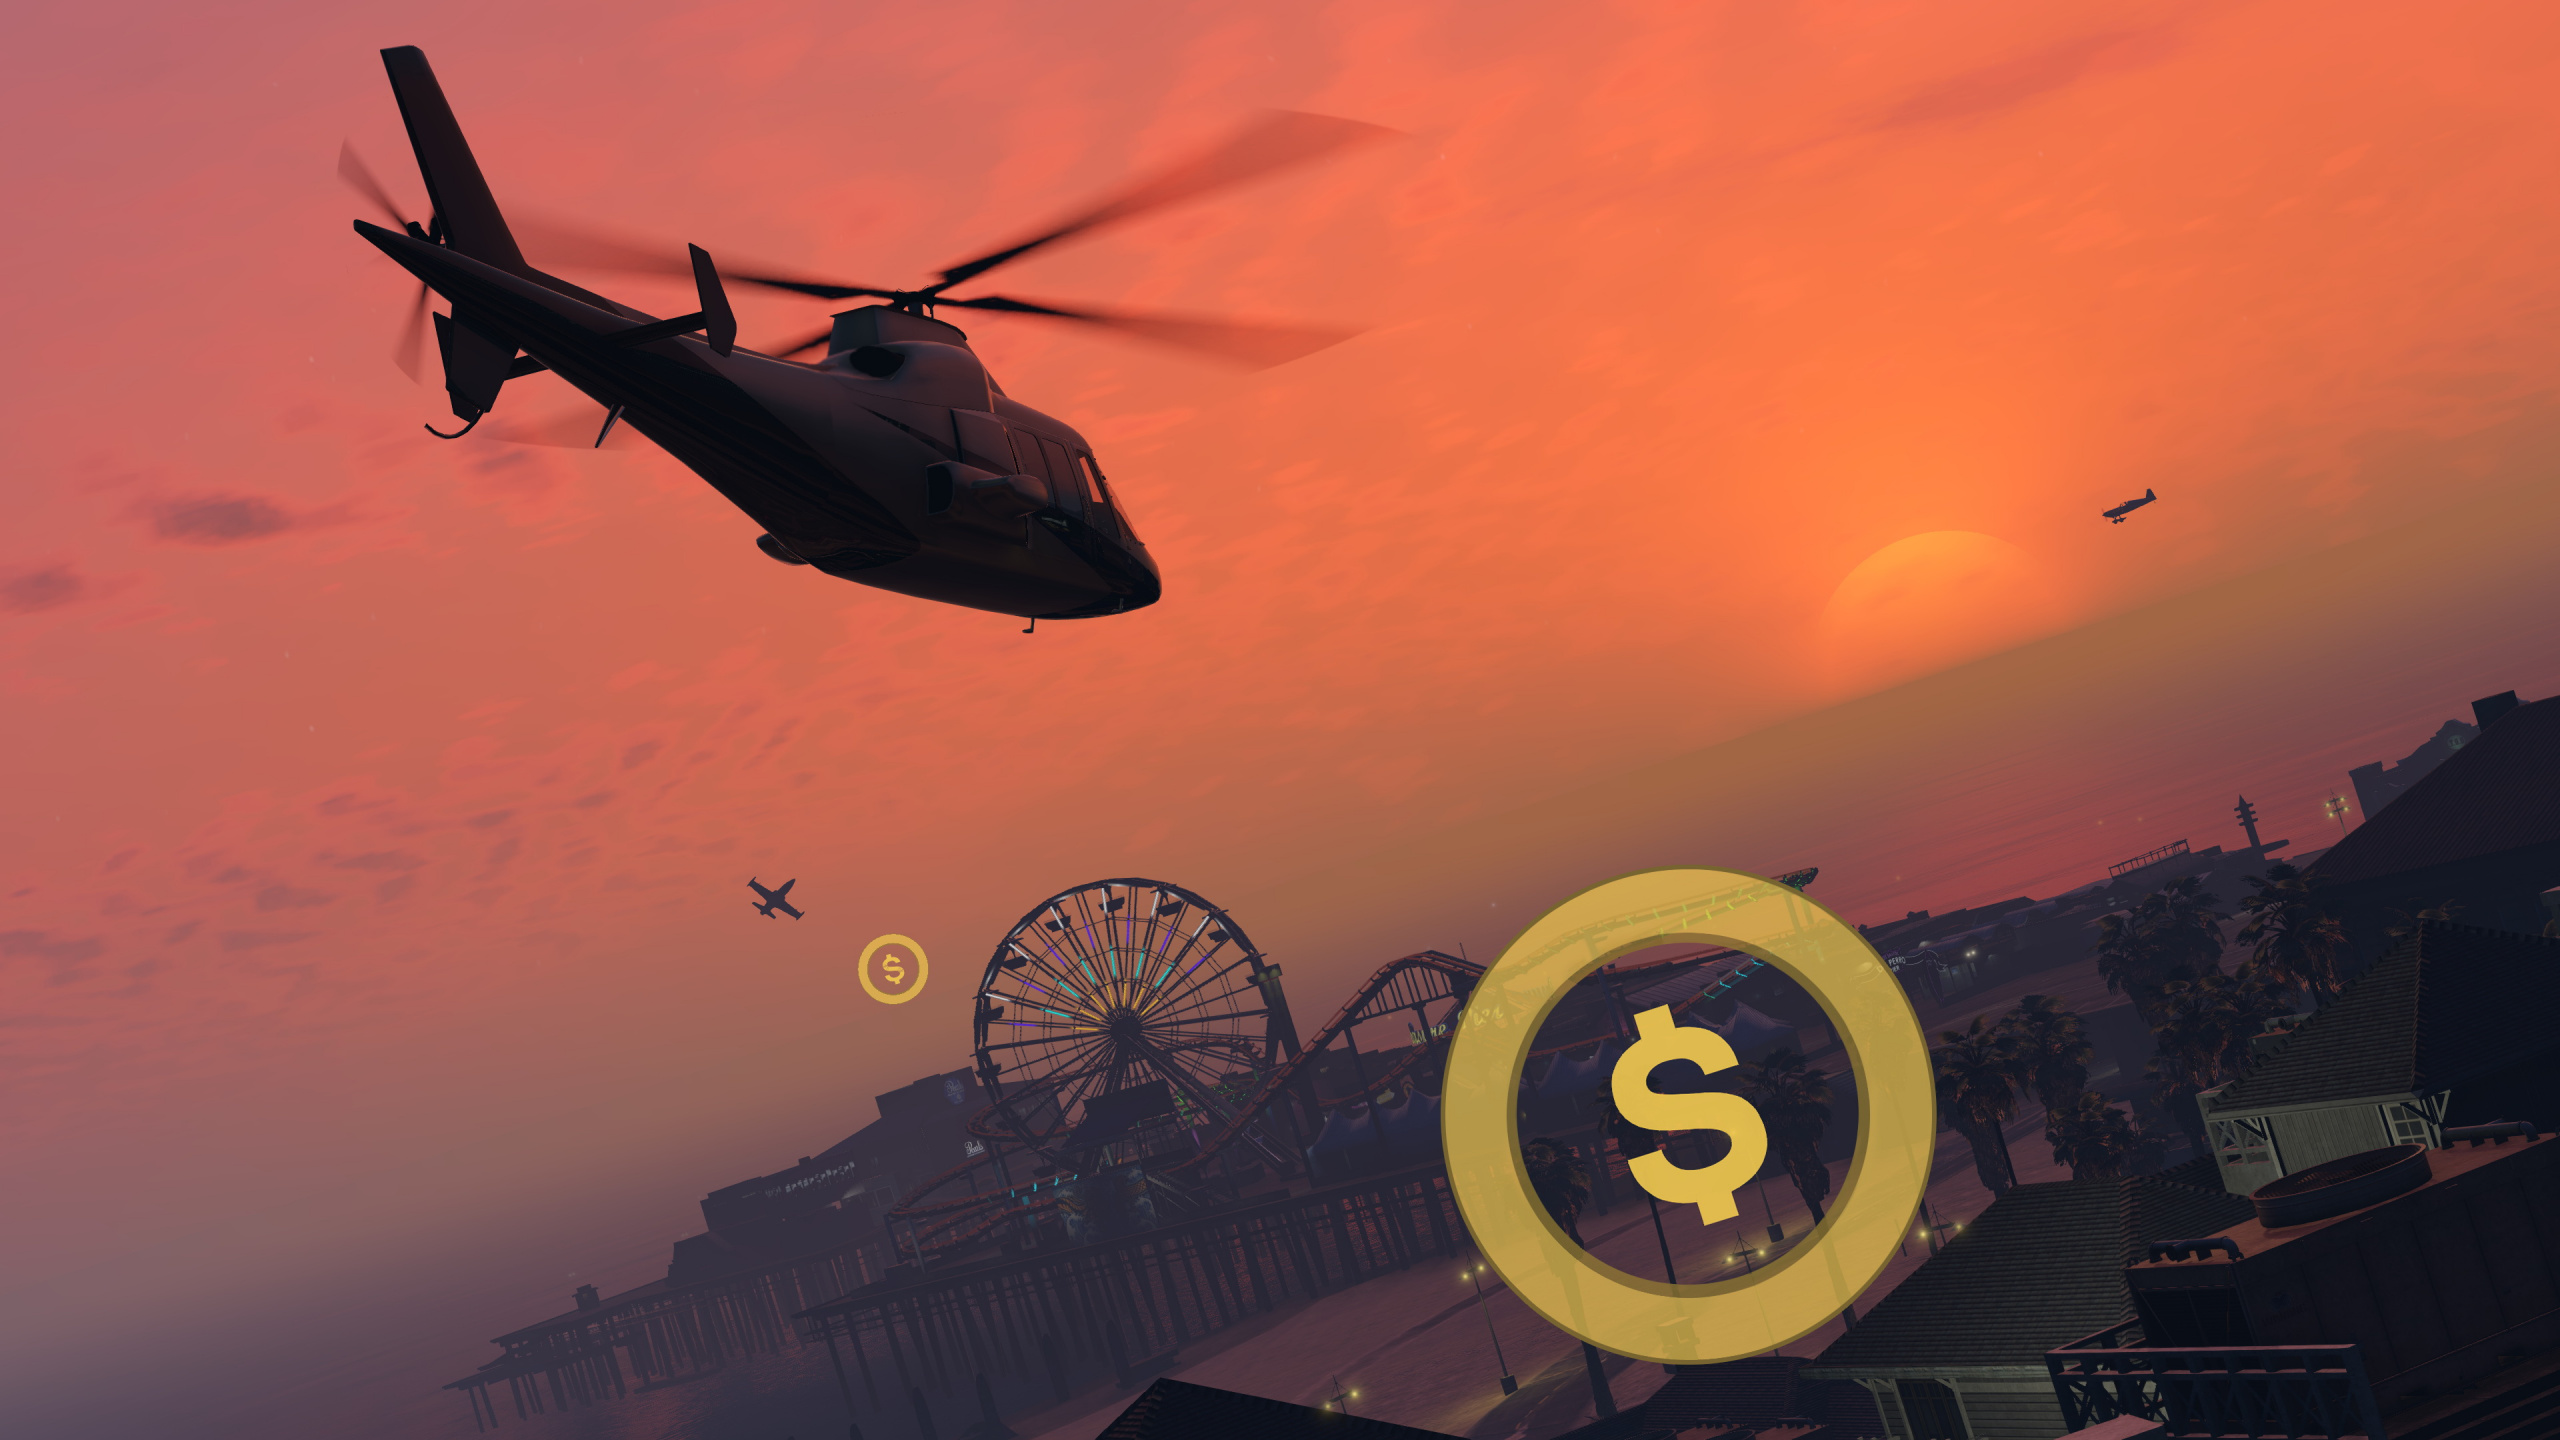 Grand Theft Auto v, Rockstar Games, Open World, Playstation 4, Helicopter. Wallpaper in 2560x1440 Resolution